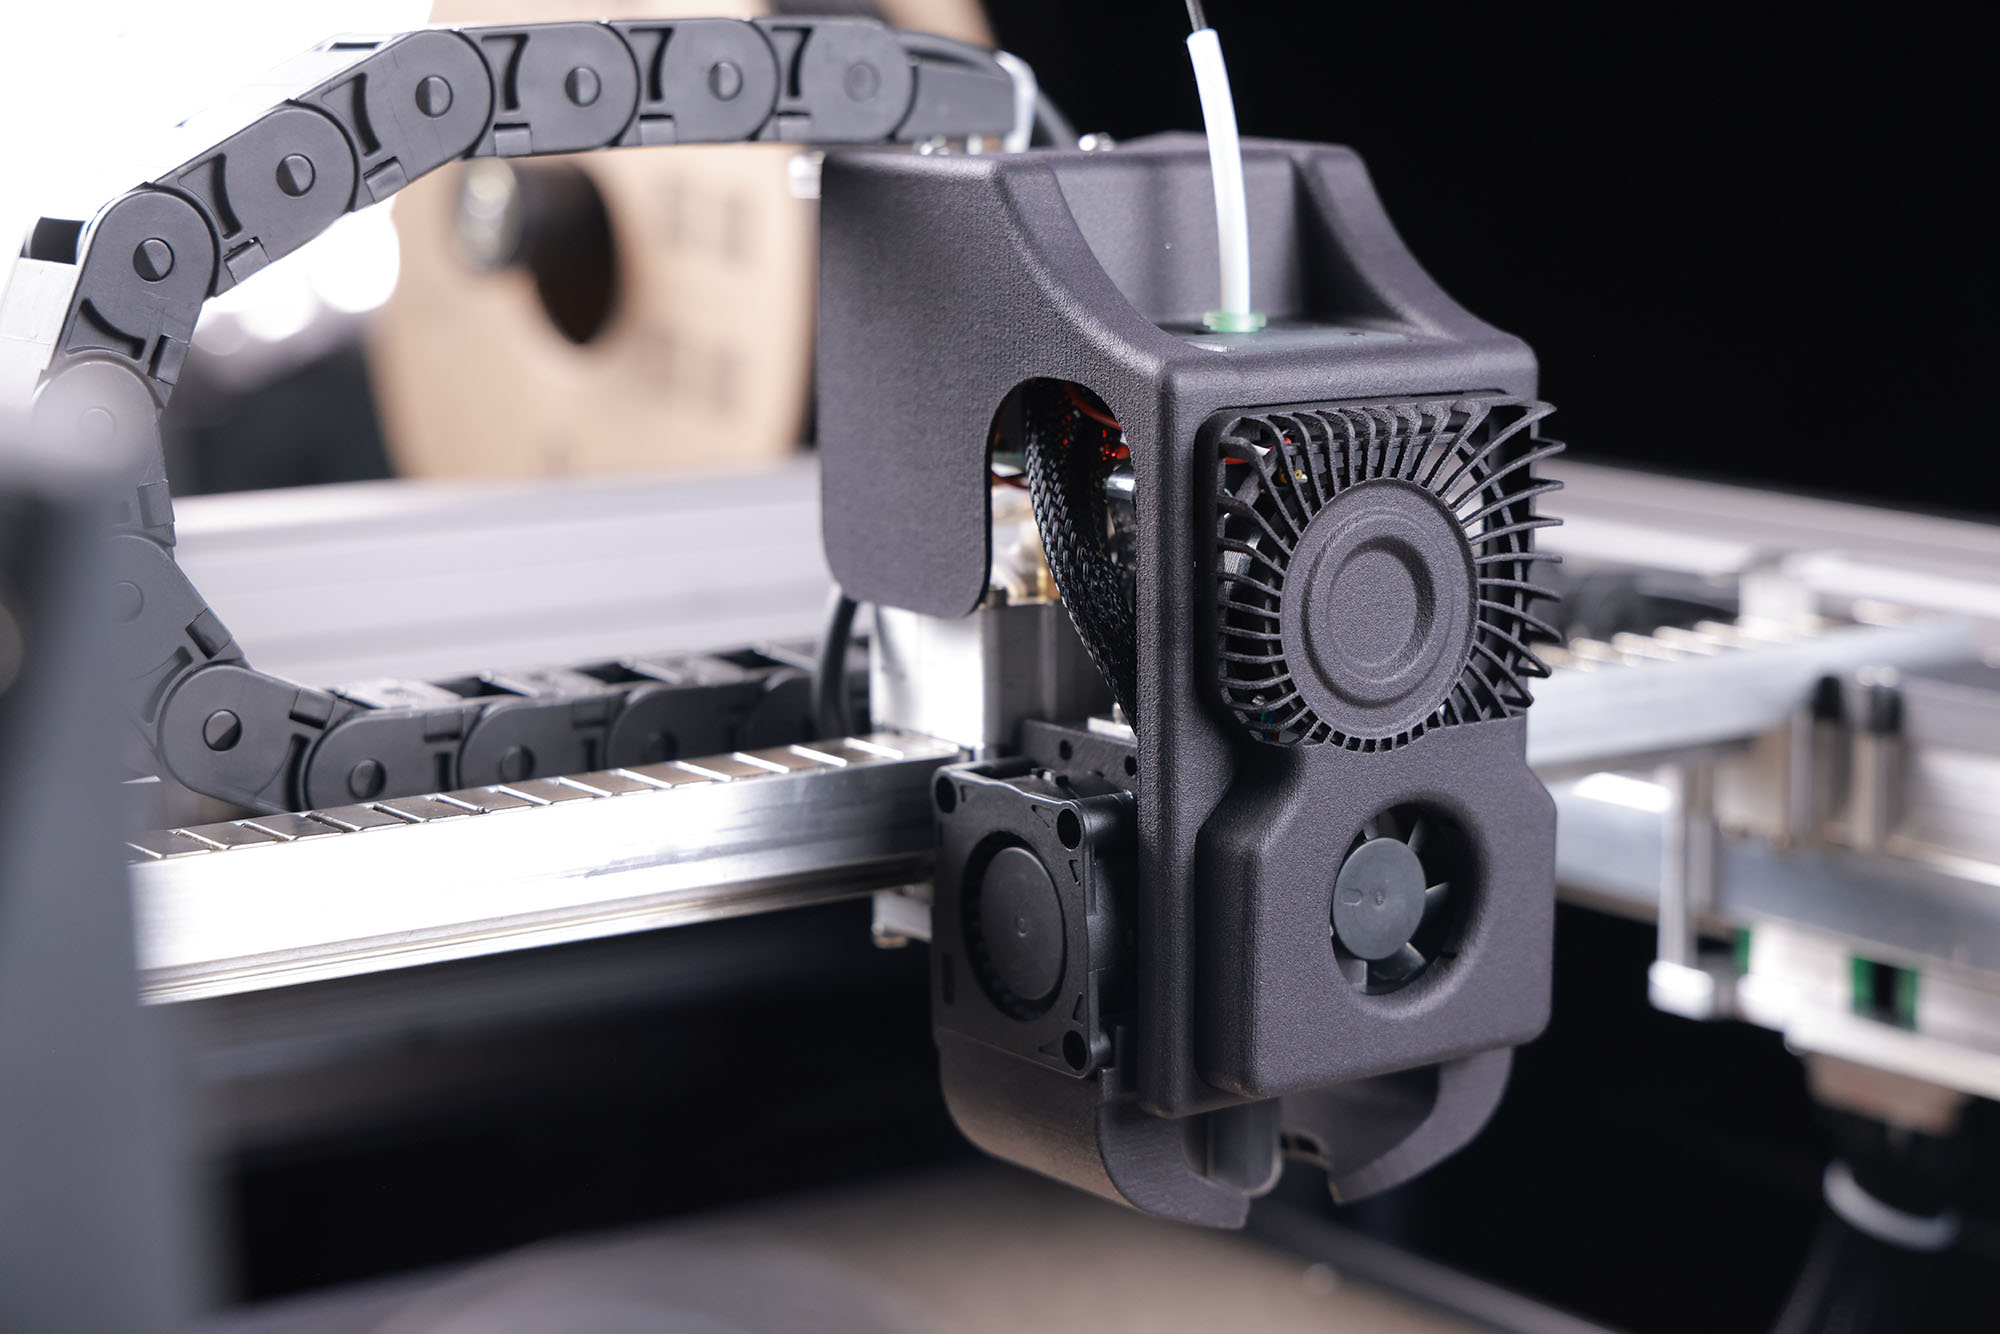 Magneto X's Lancer extruder system delivers an extrusion force of 90 Newtons and a filament speed of 30 mm/sec for quick, consistent 3D printing